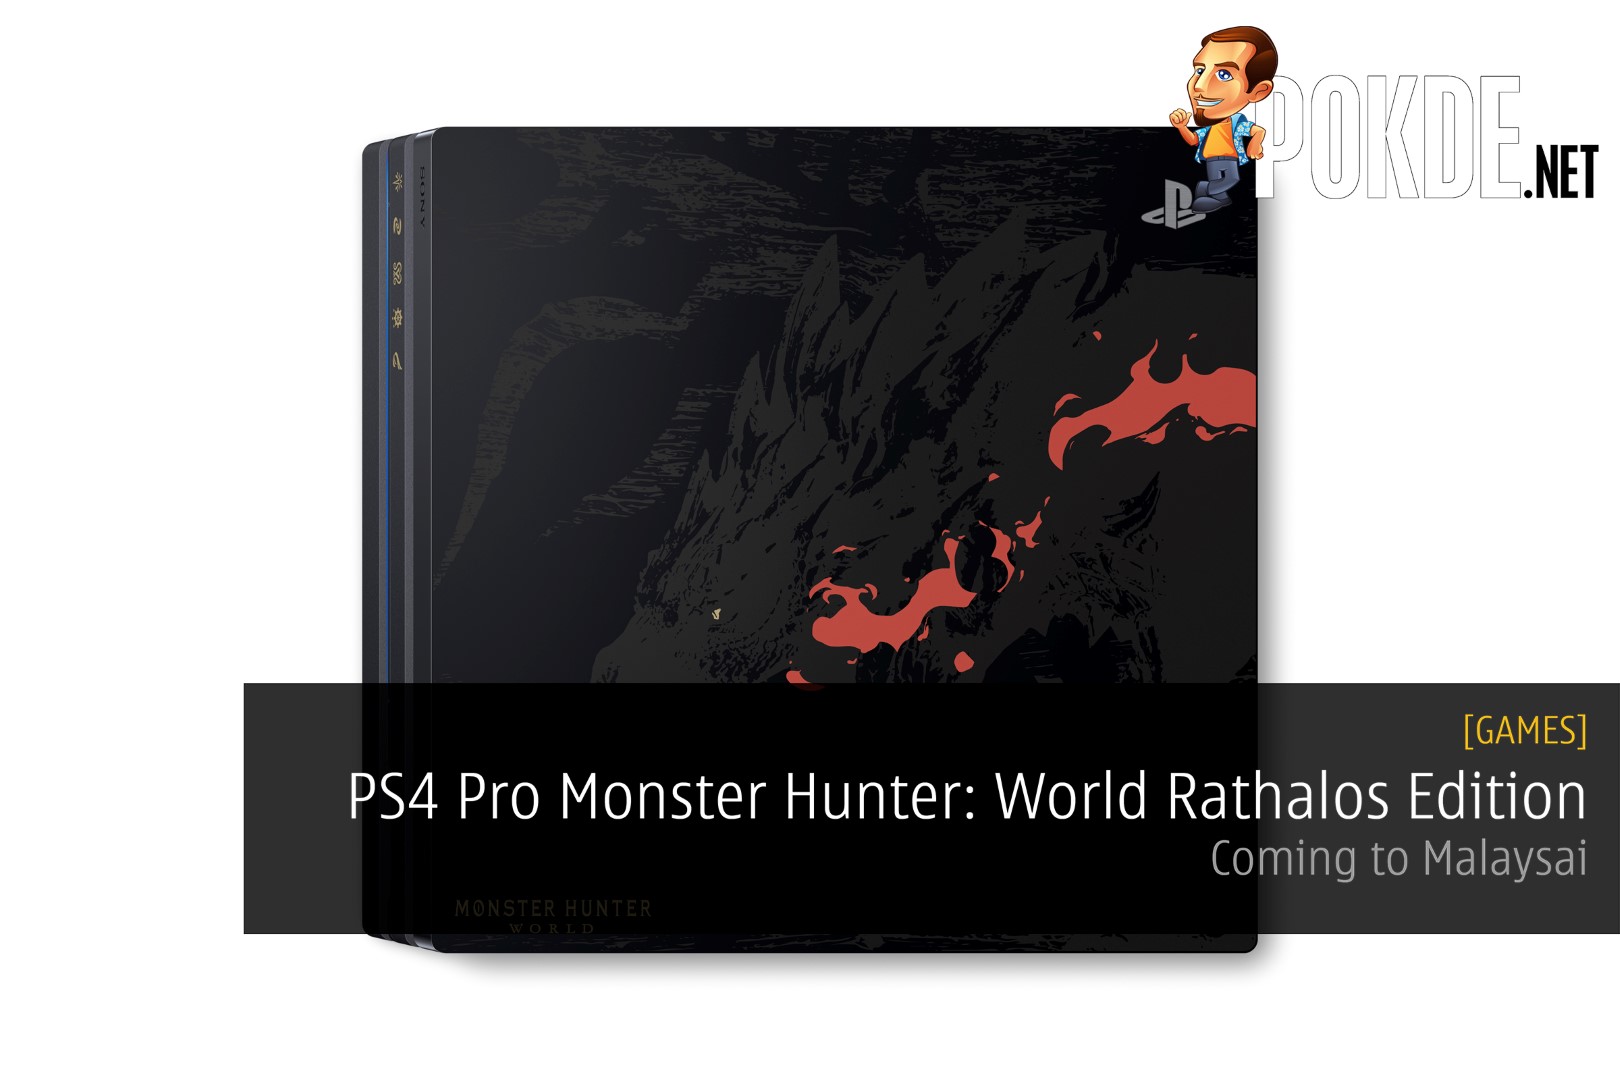 PS4 Pro Monster Hunter: World Rathalos Edition Is Coming To Malaysia! 36